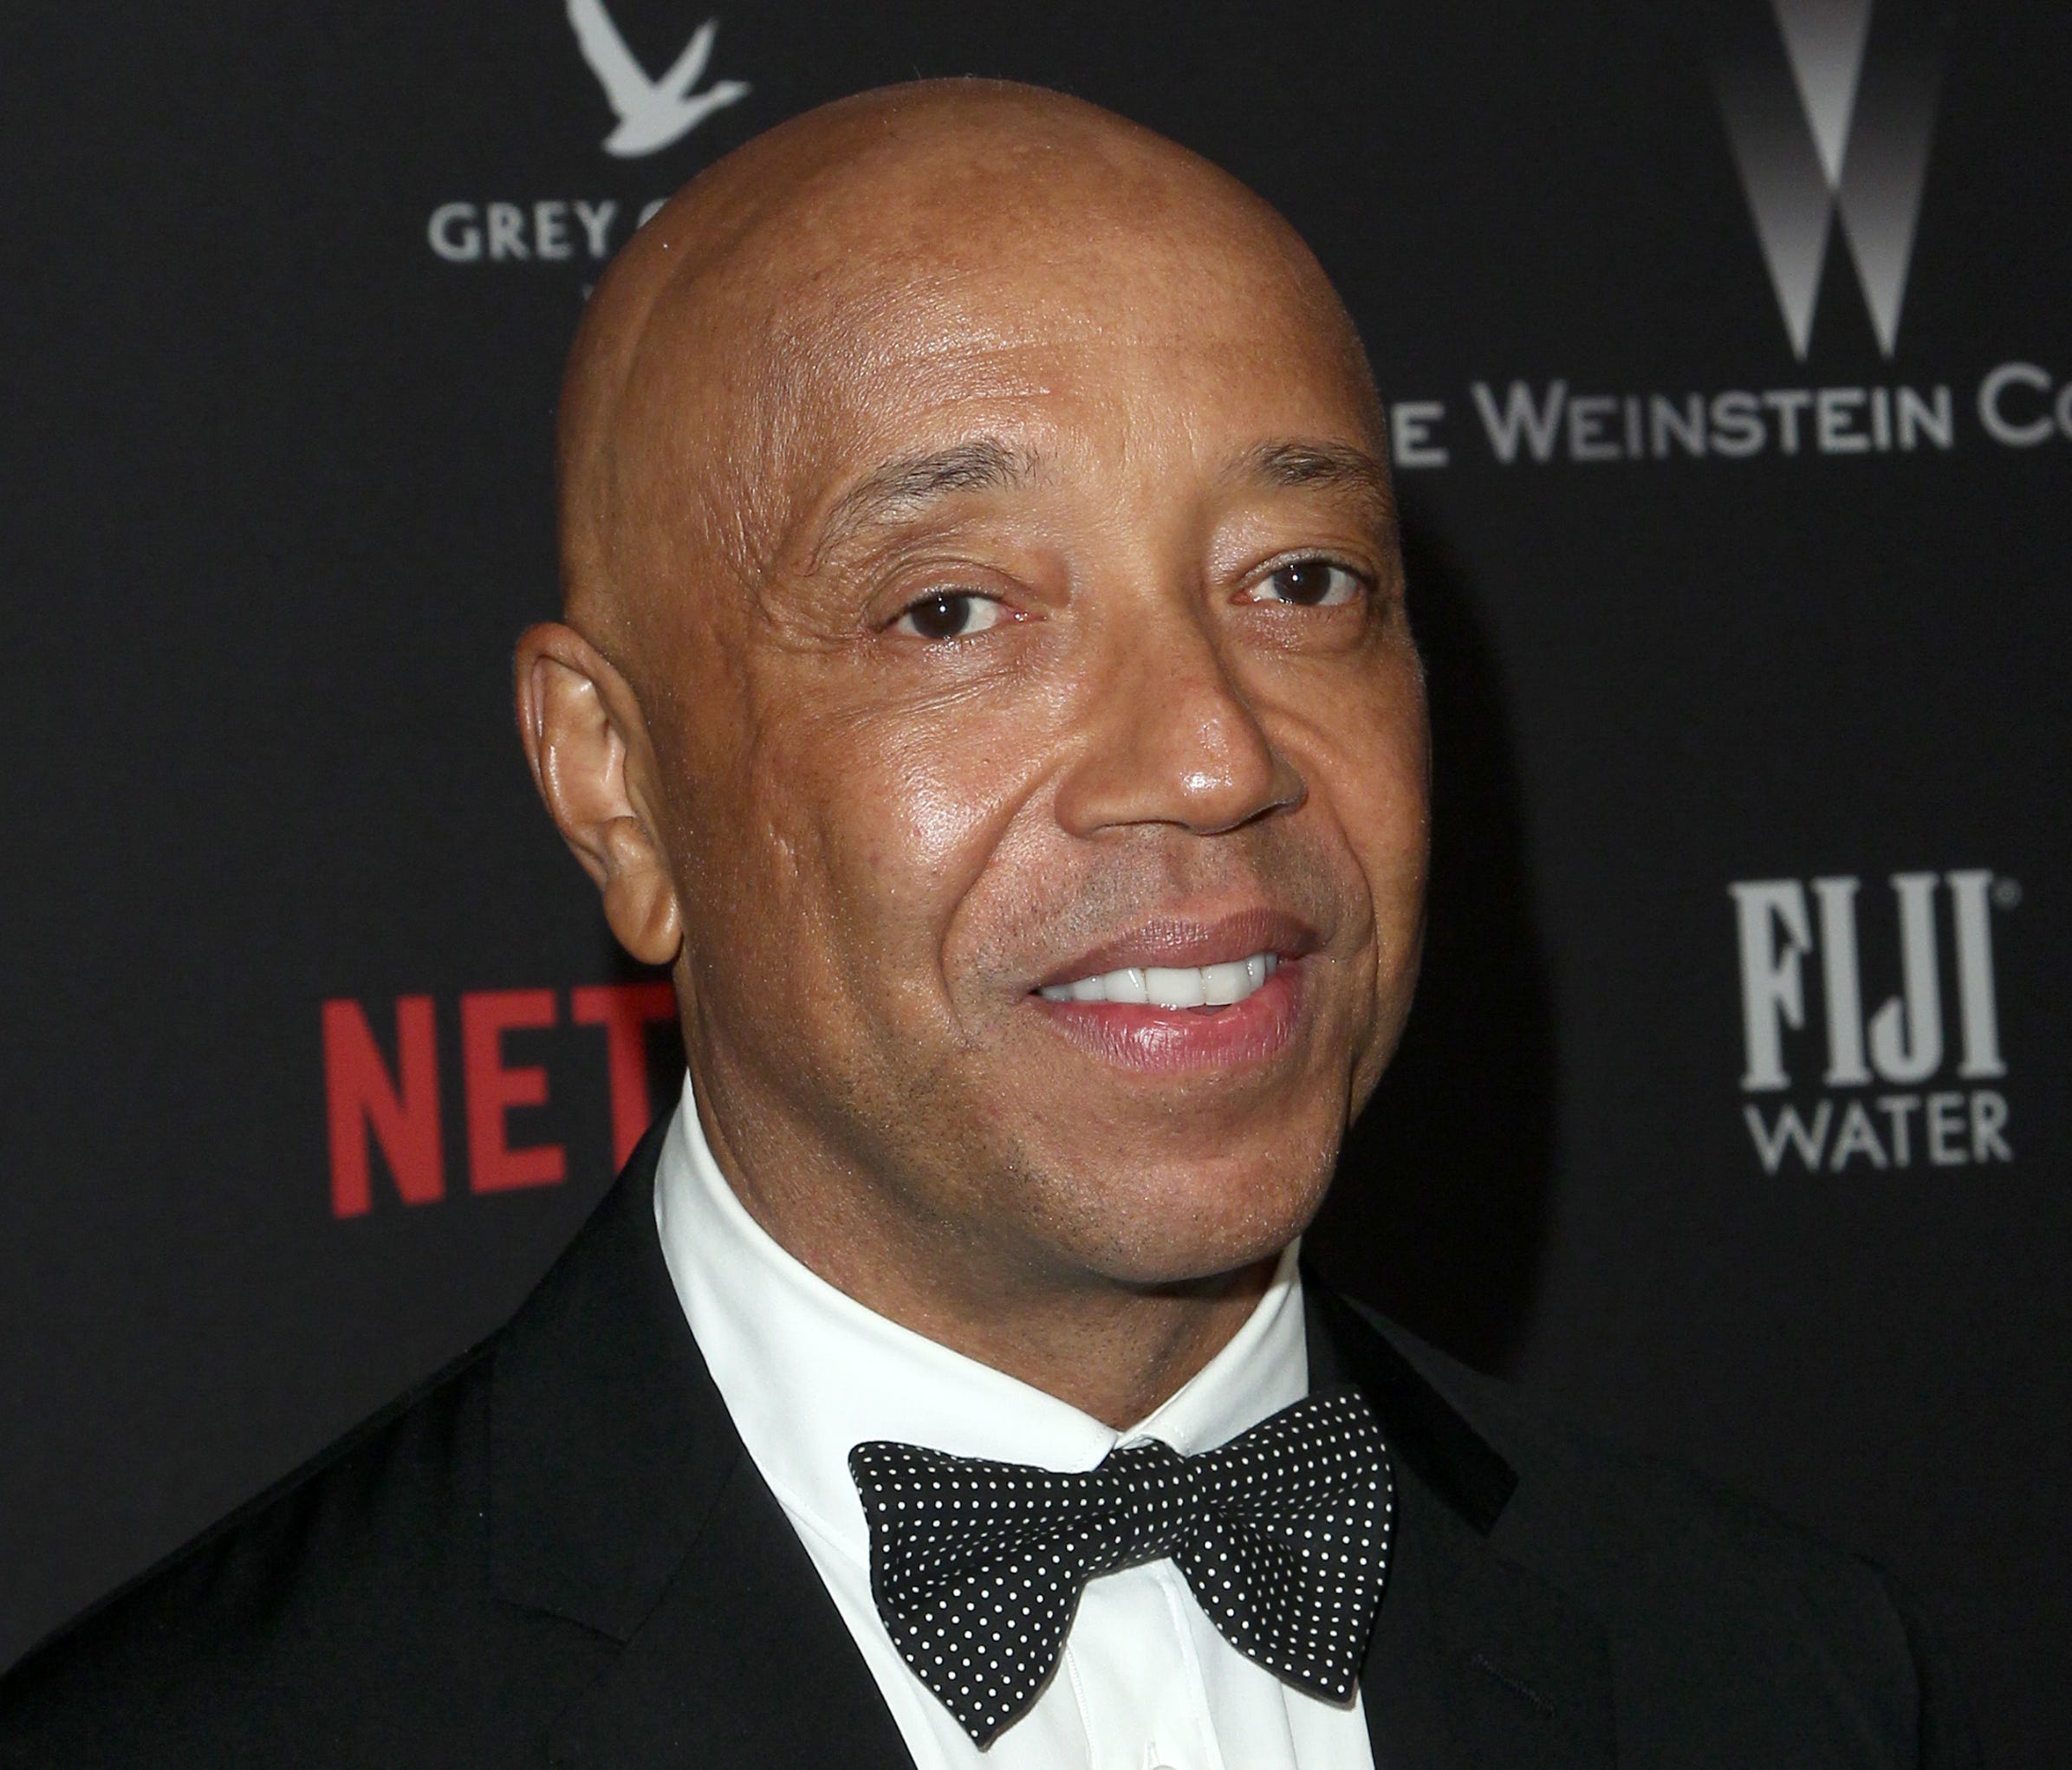 Russell Simmons was hit with a $5 million lawsuit Wednesday from a woman alleging he raped her in 2016.